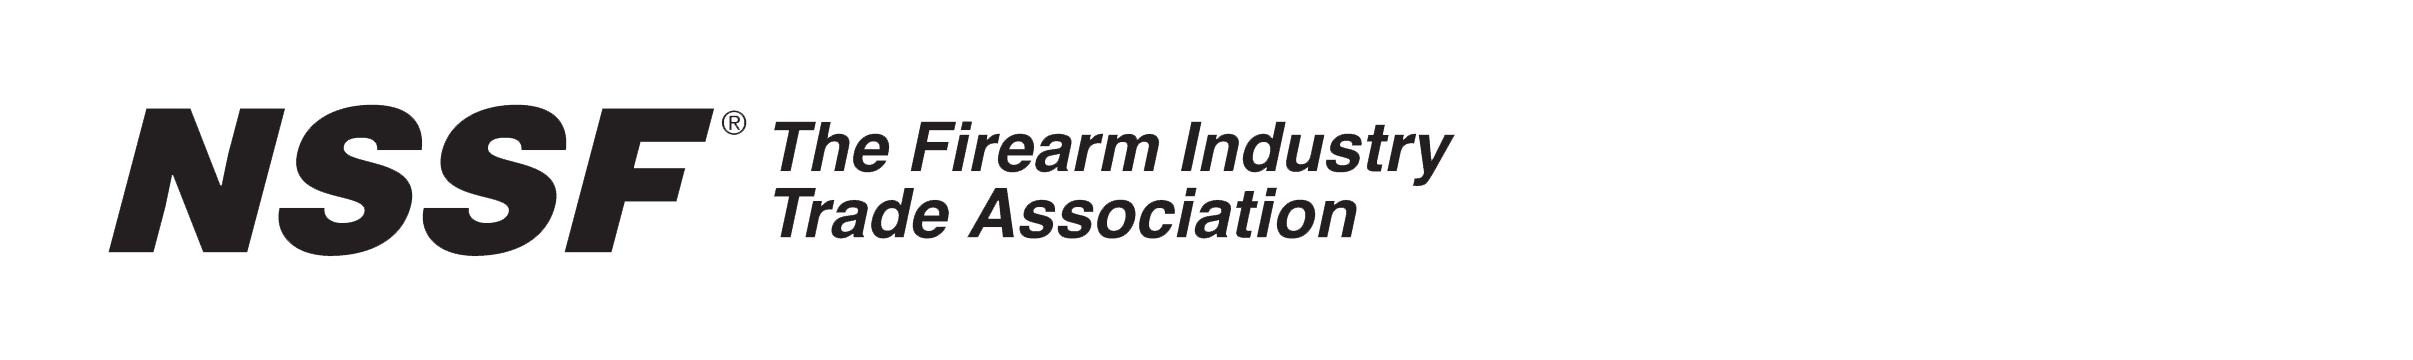 NSSF - The Firearms Industry Trade Association